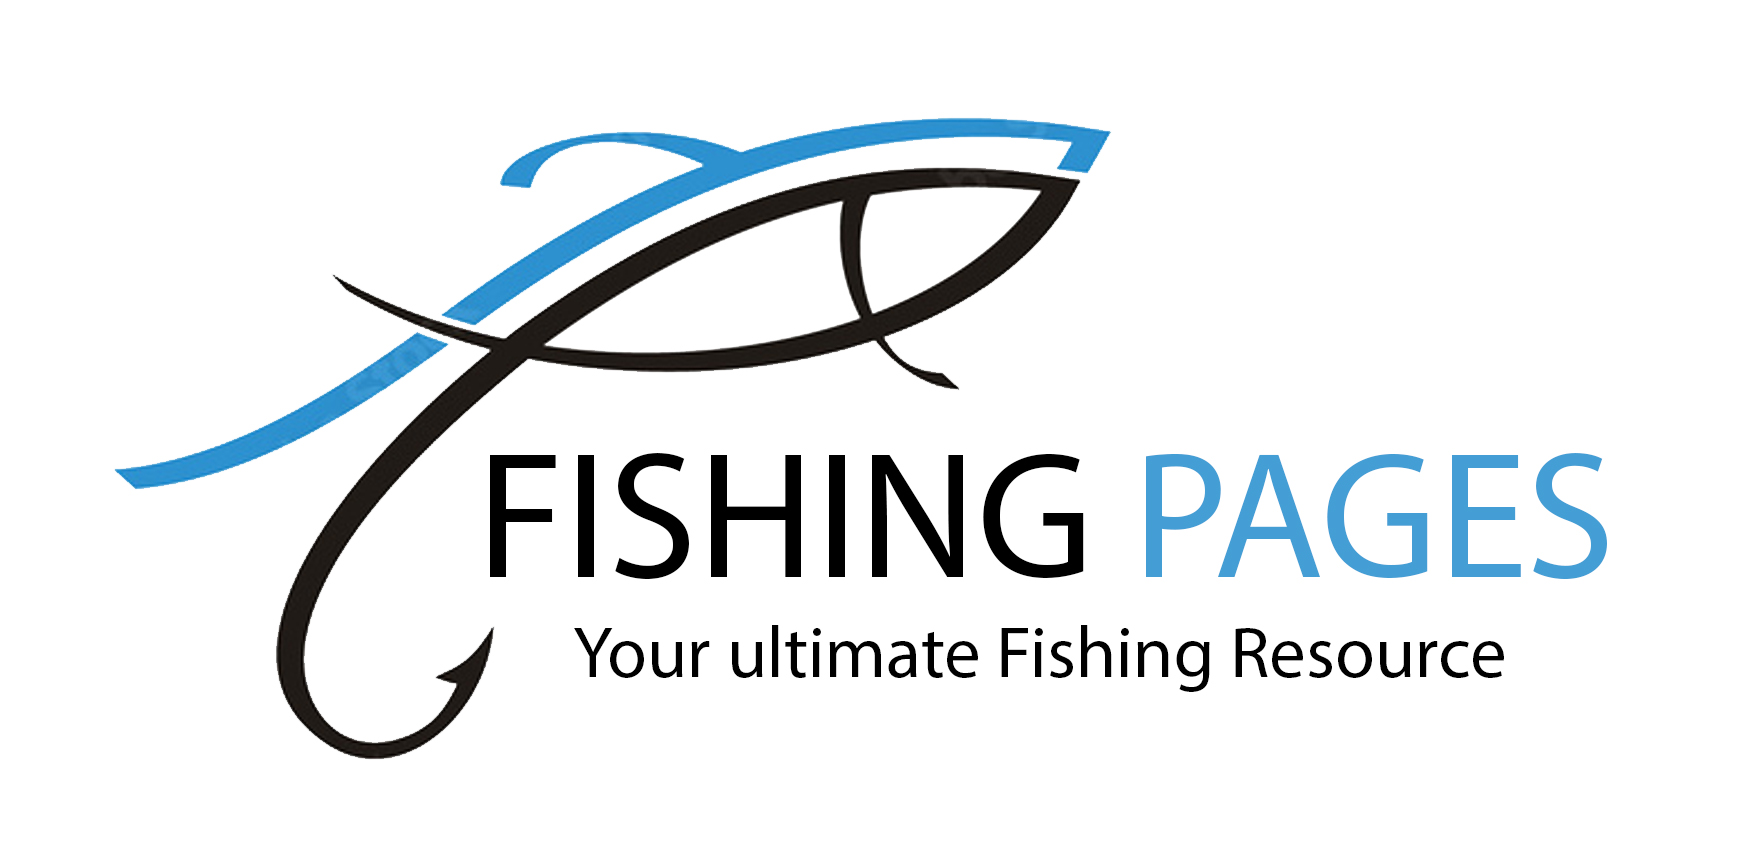 FishingPages Contact us